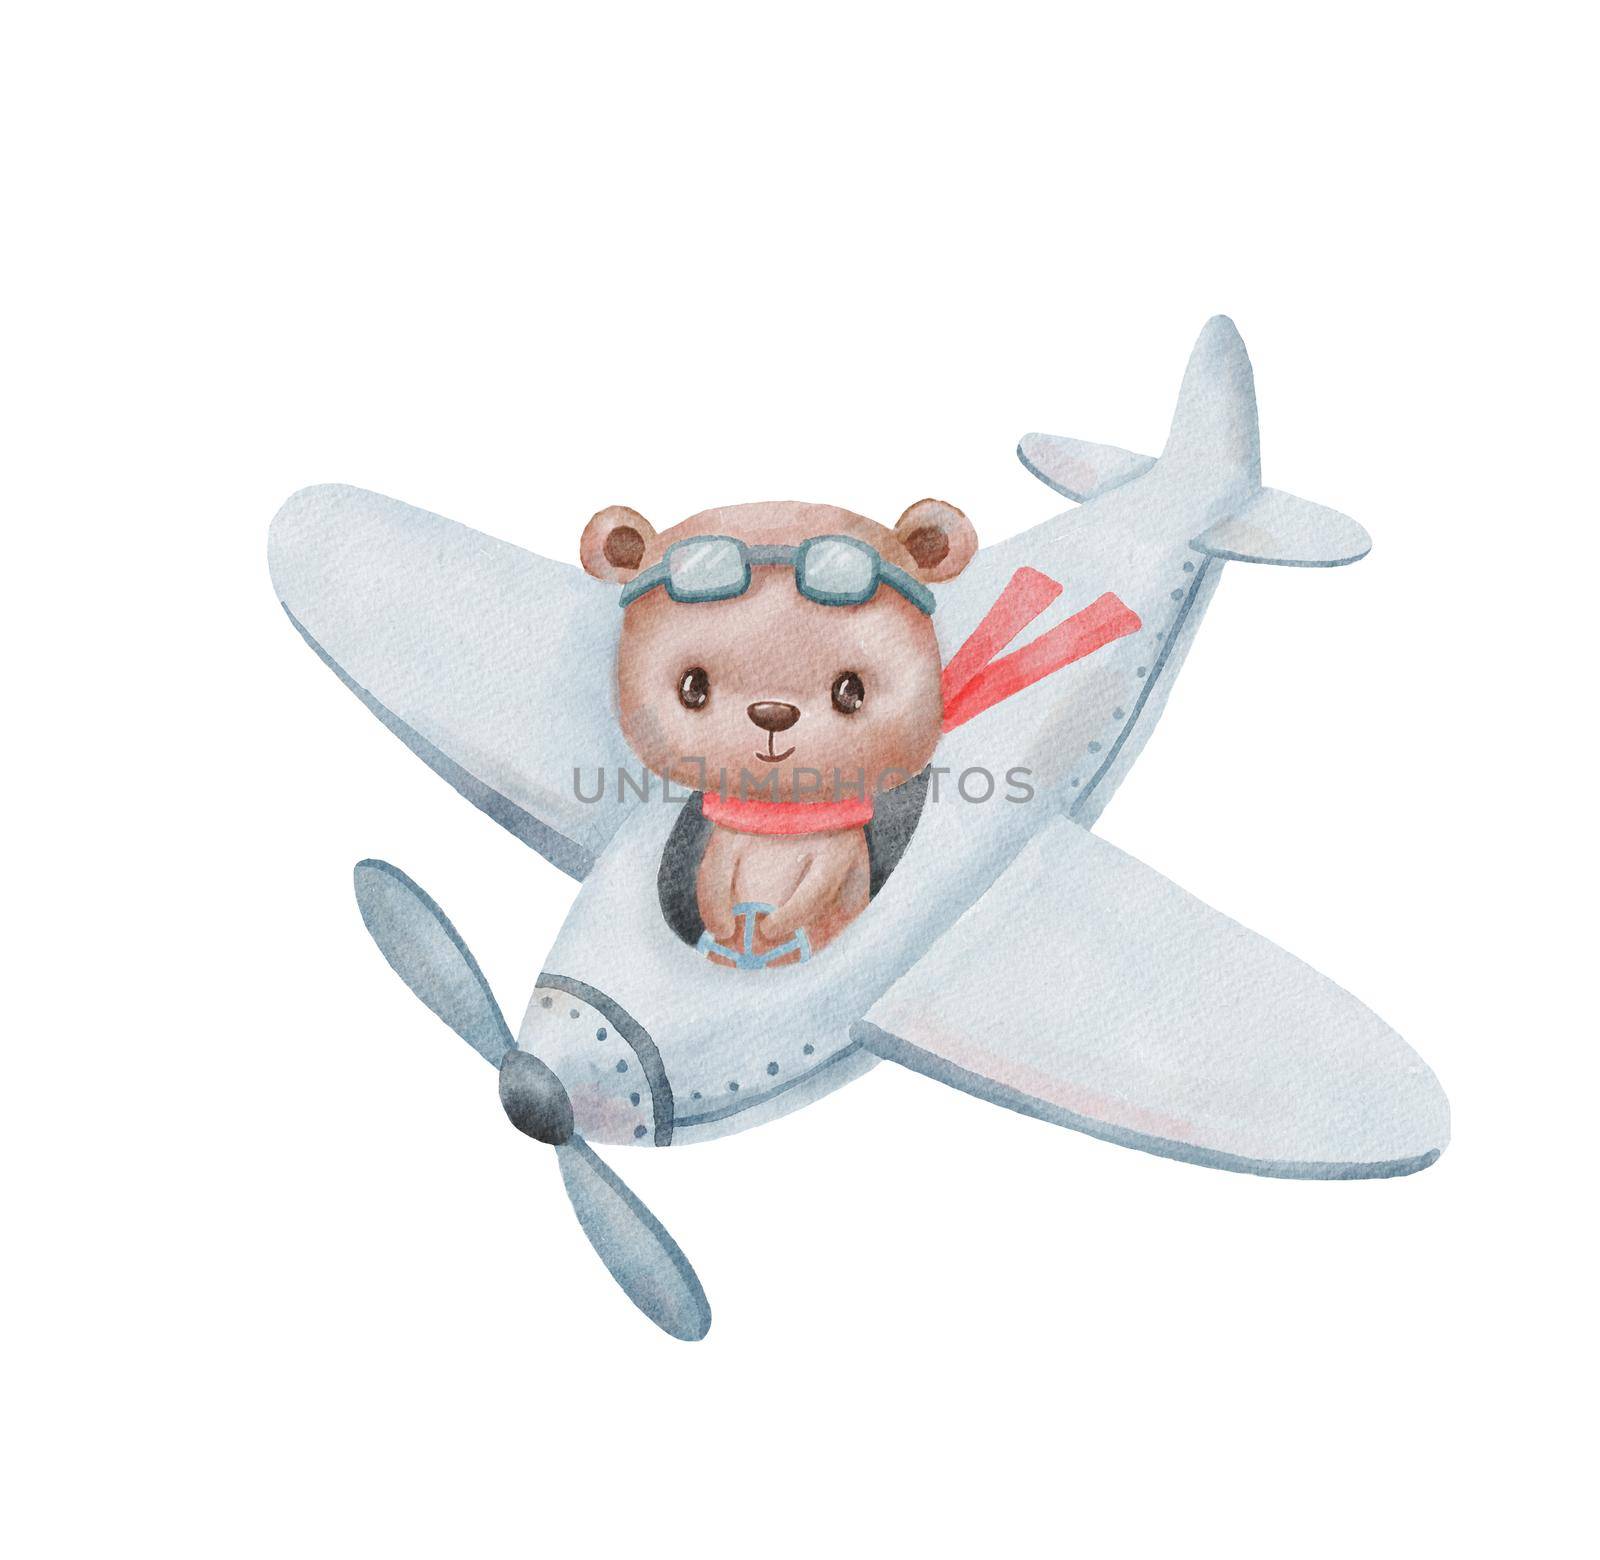 Cute bear on airplane. Watercolor illustration isolated on white background. Baby bear pilot by ElenaPlatova